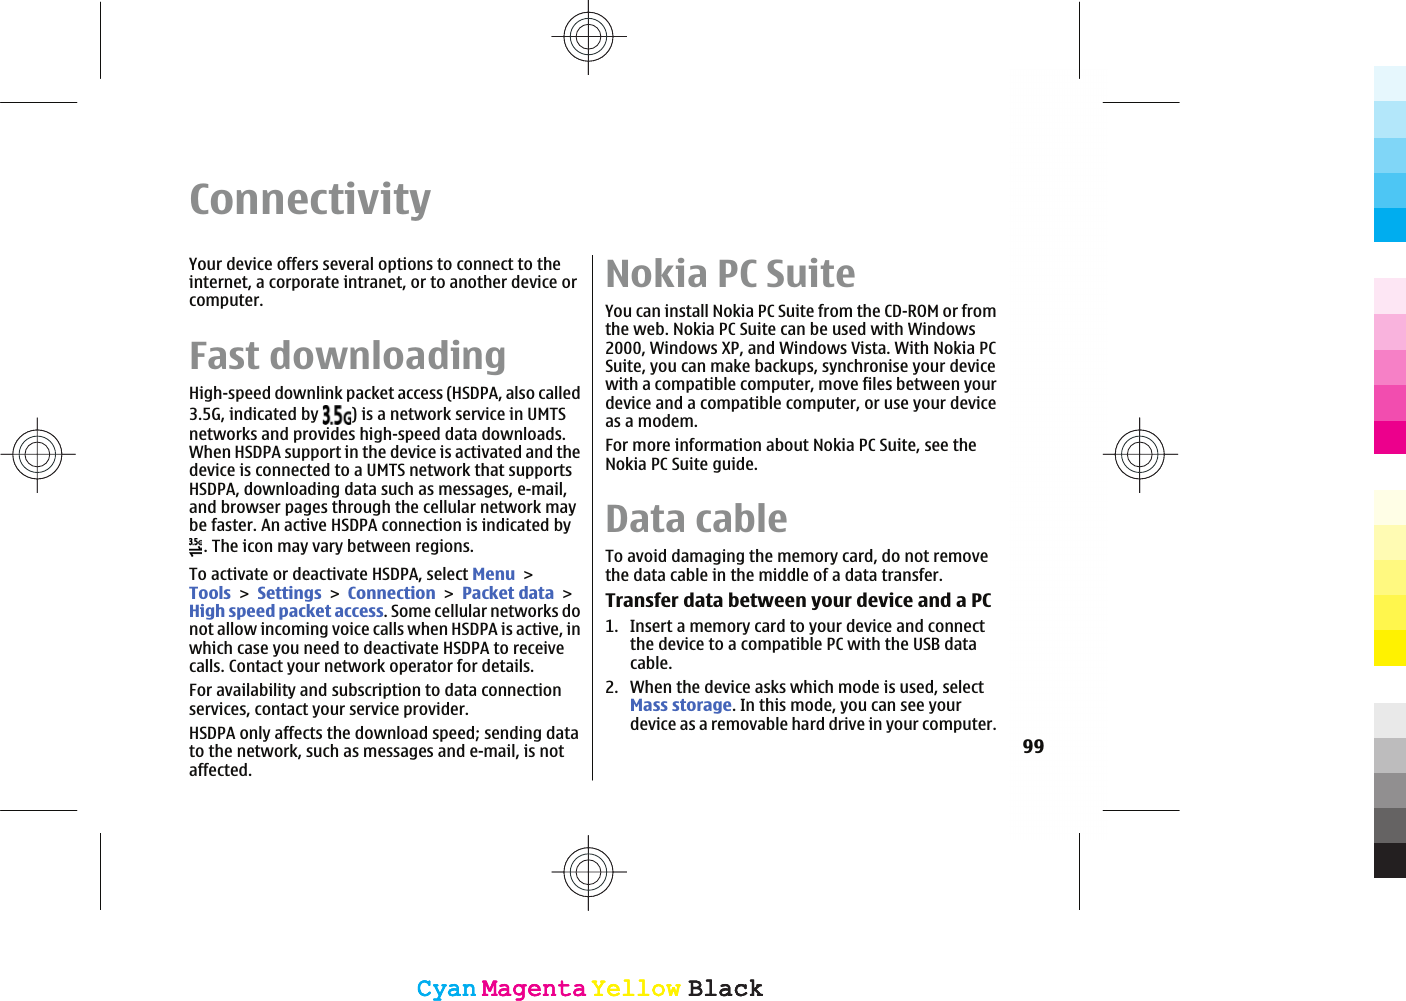 ConnectivityYour device offers several options to connect to theinternet, a corporate intranet, or to another device orcomputer.Fast downloadingHigh-speed downlink packet access (HSDPA, also called3.5G, indicated by  ) is a network service in UMTSnetworks and provides high-speed data downloads.When HSDPA support in the device is activated and thedevice is connected to a UMTS network that supportsHSDPA, downloading data such as messages, e-mail,and browser pages through the cellular network maybe faster. An active HSDPA connection is indicated by. The icon may vary between regions.To activate or deactivate HSDPA, select MenuToolsSettingsConnectionPacket dataHigh speed packet access. Some cellular networks donot allow incoming voice calls when HSDPA is active, inwhich case you need to deactivate HSDPA to receivecalls. Contact your network operator for details.For availability and subscription to data connectionservices, contact your service provider.HSDPA only affects the download speed; sending datato the network, such as messages and e-mail, is notaffected.Nokia PC SuiteYou can install Nokia PC Suite from the CD-ROM or fromthe web. Nokia PC Suite can be used with Windows2000, Windows XP, and Windows Vista. With Nokia PCSuite, you can make backups, synchronise your devicewith a compatible computer, move files between yourdevice and a compatible computer, or use your deviceas a modem.For more information about Nokia PC Suite, see theNokia PC Suite guide.Data cableTo avoid damaging the memory card, do not removethe data cable in the middle of a data transfer.Transfer data between your device and a PC1. Insert a memory card to your device and connectthe device to a compatible PC with the USB datacable.2. When the device asks which mode is used, selectMass storage. In this mode, you can see yourdevice as a removable hard drive in your computer.99CyanCyanMagentaMagentaYellowYellowBlackBlackCyanCyanMagentaMagentaYellowYellowBlackBlack